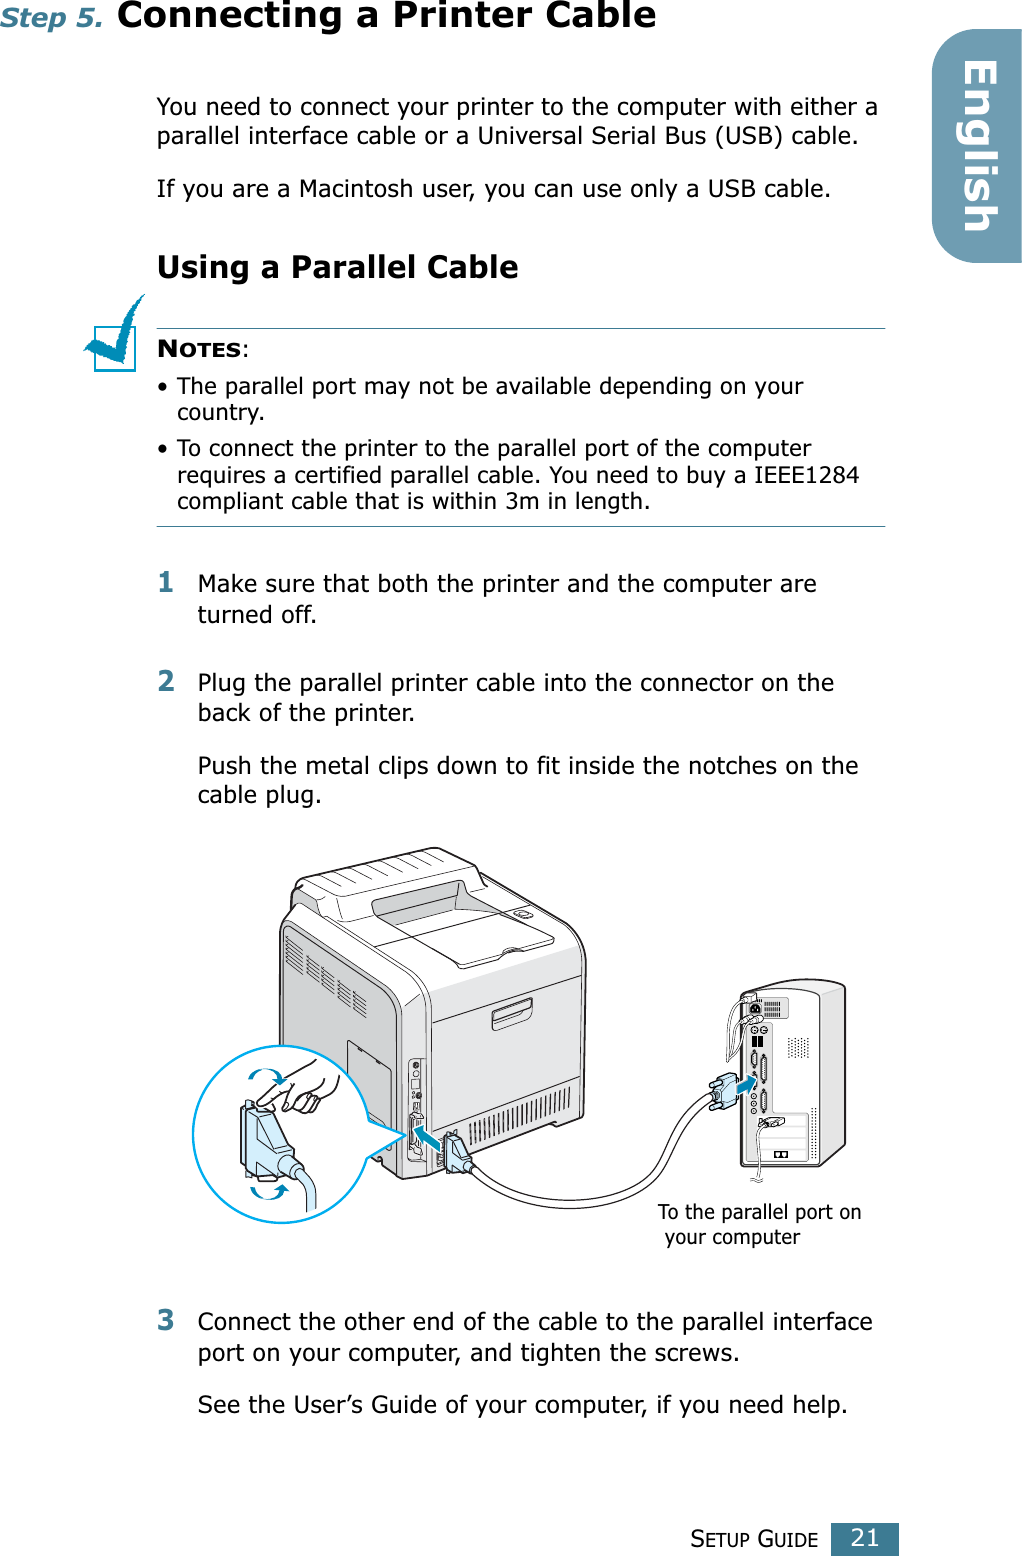 SETUP GUIDE21EnglishStep 5. Connecting a Printer CableYou need to connect your printer to the computer with either a parallel interface cable or a Universal Serial Bus (USB) cable. If you are a Macintosh user, you can use only a USB cable.Using a Parallel CableNOTES: • The parallel port may not be available depending on your country.• To connect the printer to the parallel port of the computer requires a certified parallel cable. You need to buy a IEEE1284 compliant cable that is within 3m in length.1Make sure that both the printer and the computer are turned off.2Plug the parallel printer cable into the connector on the back of the printer. Push the metal clips down to fit inside the notches on the cable plug.3Connect the other end of the cable to the parallel interface port on your computer, and tighten the screws. See the User’s Guide of your computer, if you need help.To the parallel port on your computer